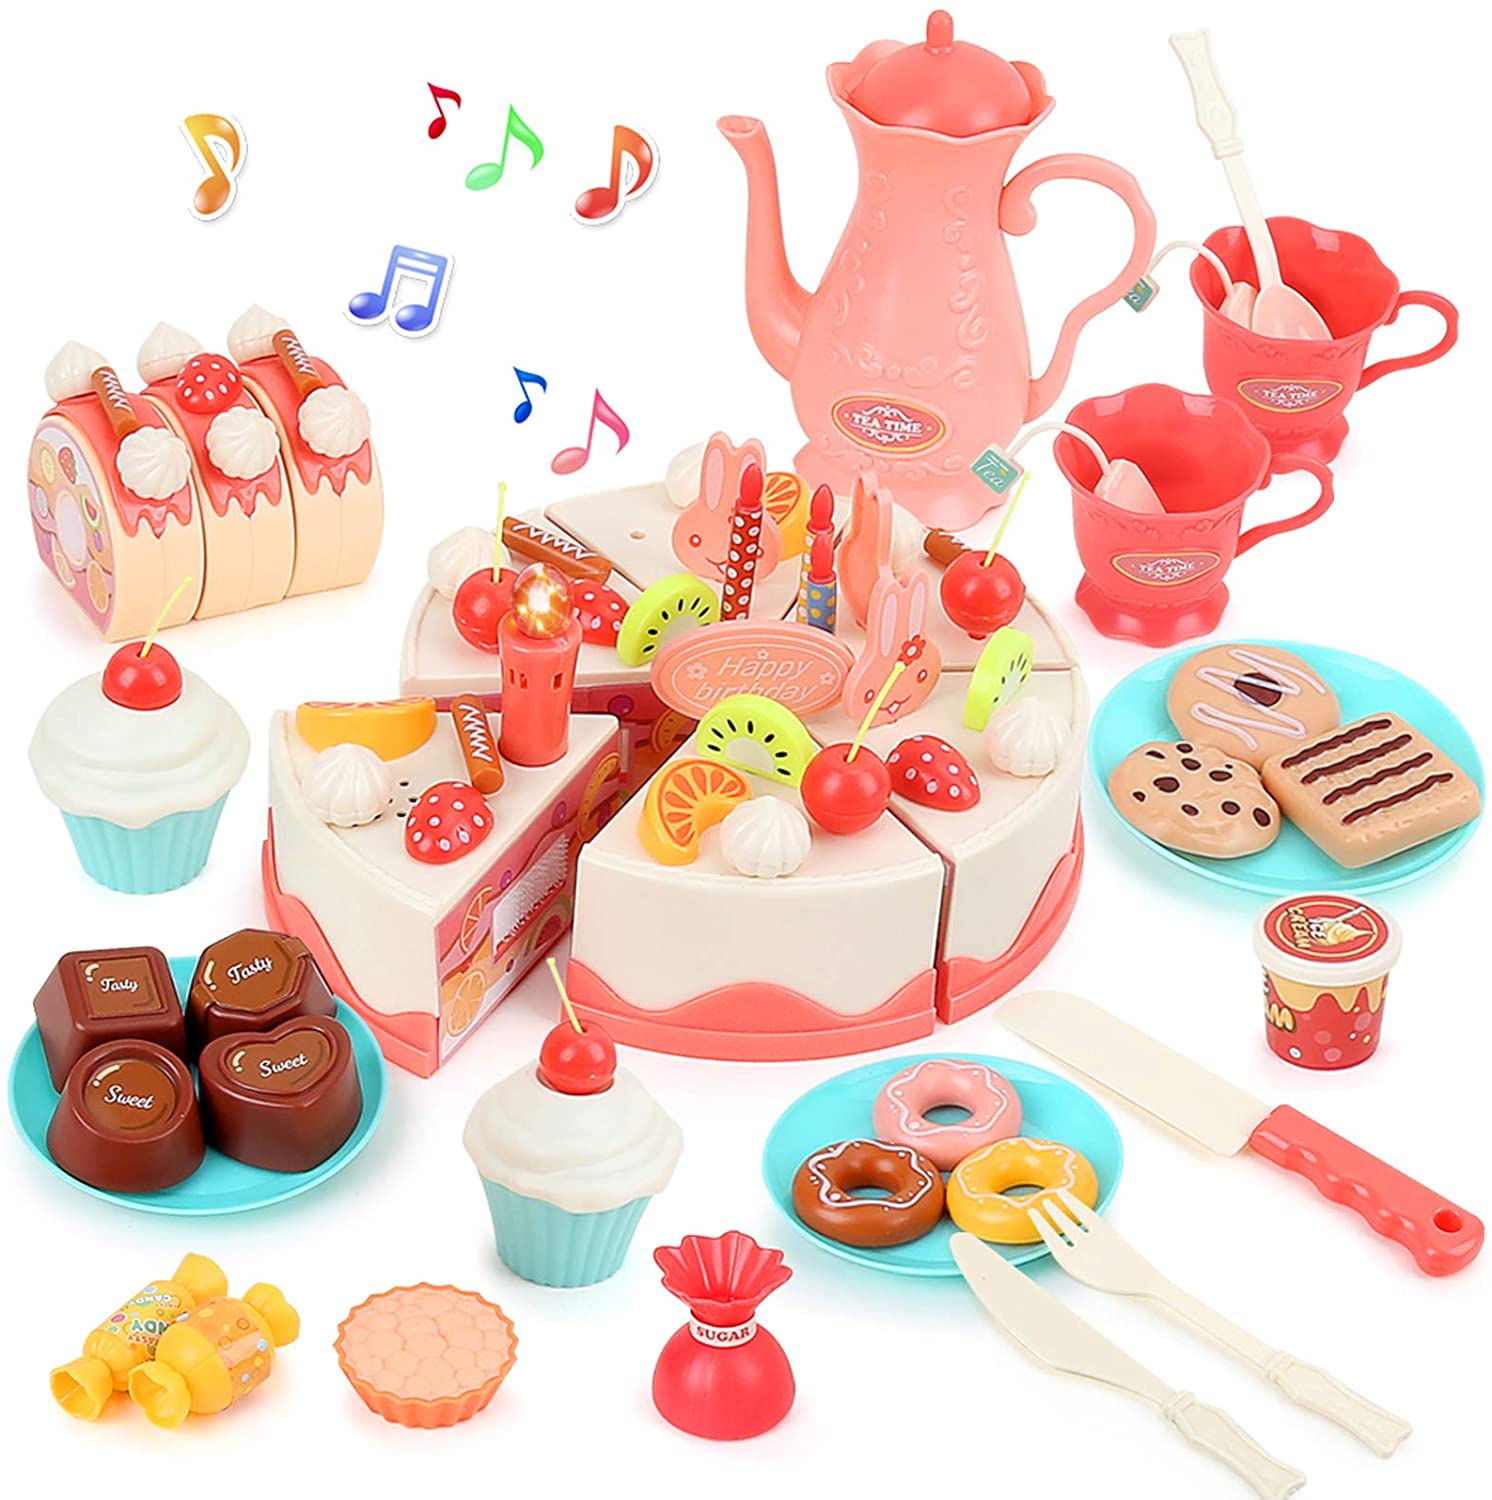 Top Quality Wooden Airplane Toy - Beebeerun Pretend Play Food for Kids,DIY 82PCS Cutting Birthday Cake Toy with Candles Fruit Dessert Plates Teacup and More,Educational Toy Kitchen Sets for Girls&...